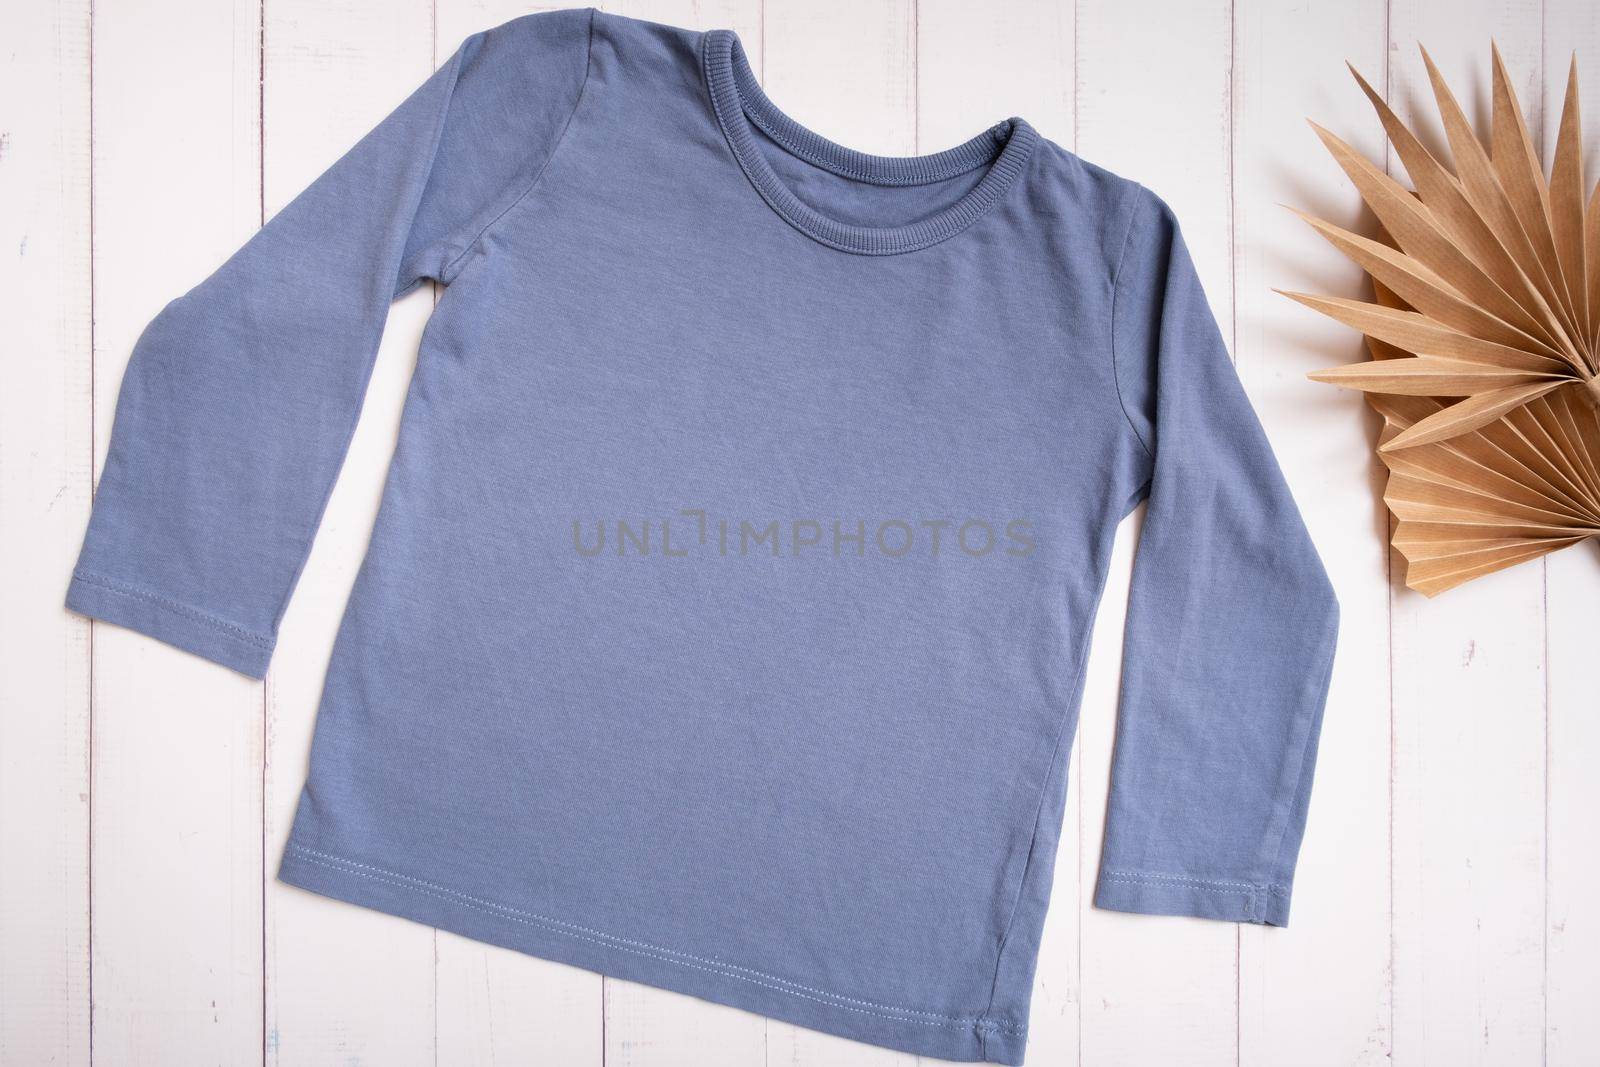 Grey baby shirt top view. Mock-up for logo, text or design on wooden background. Flat lay child clothers. by ssvimaliss